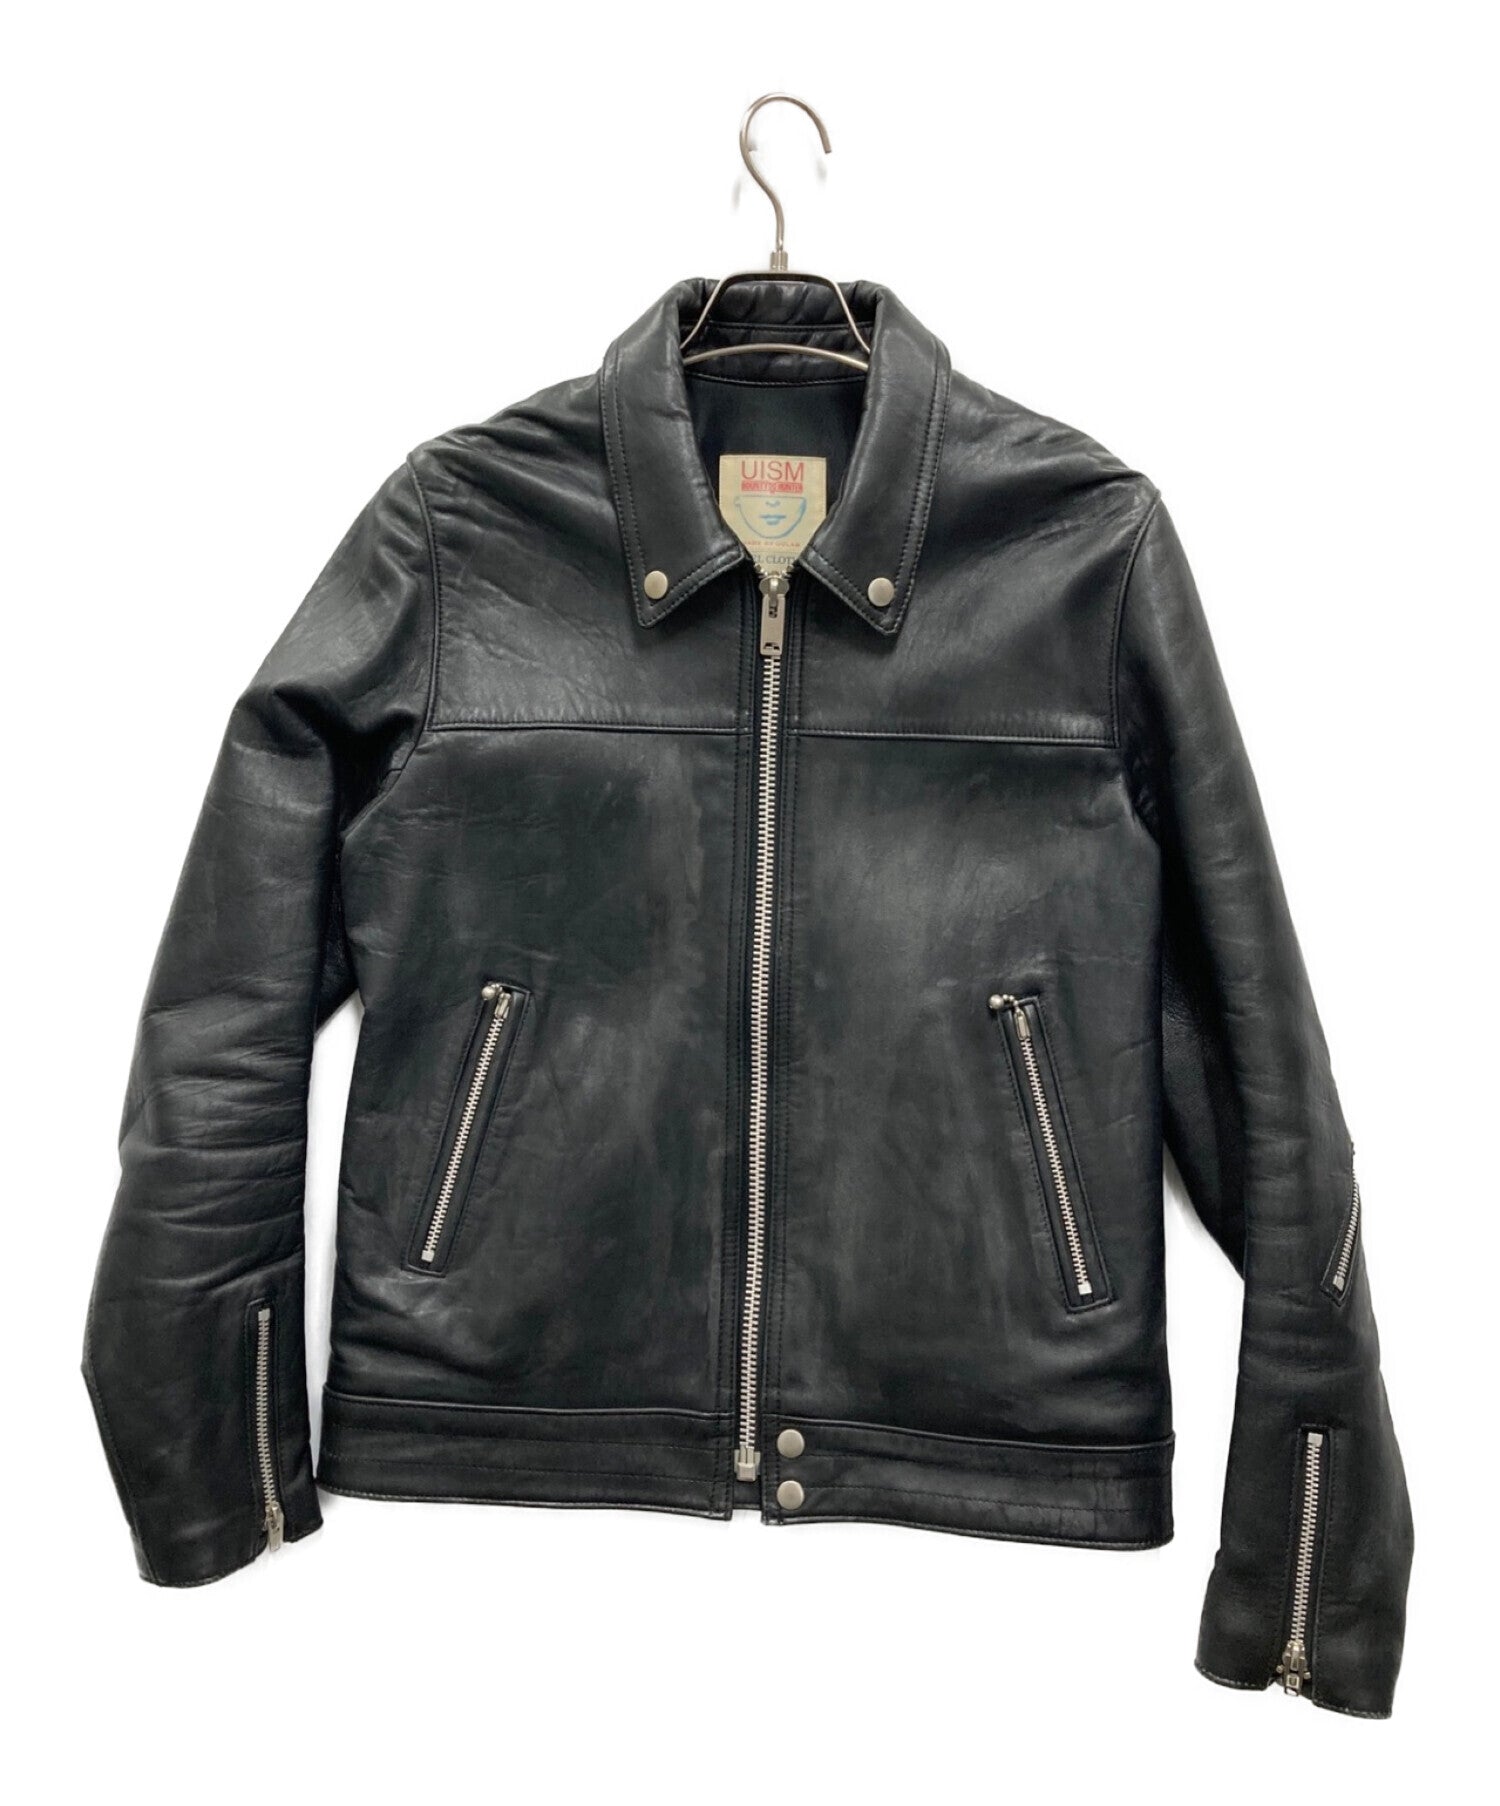 UNDERCOVERISM UISM Leather single riders jacket G9201